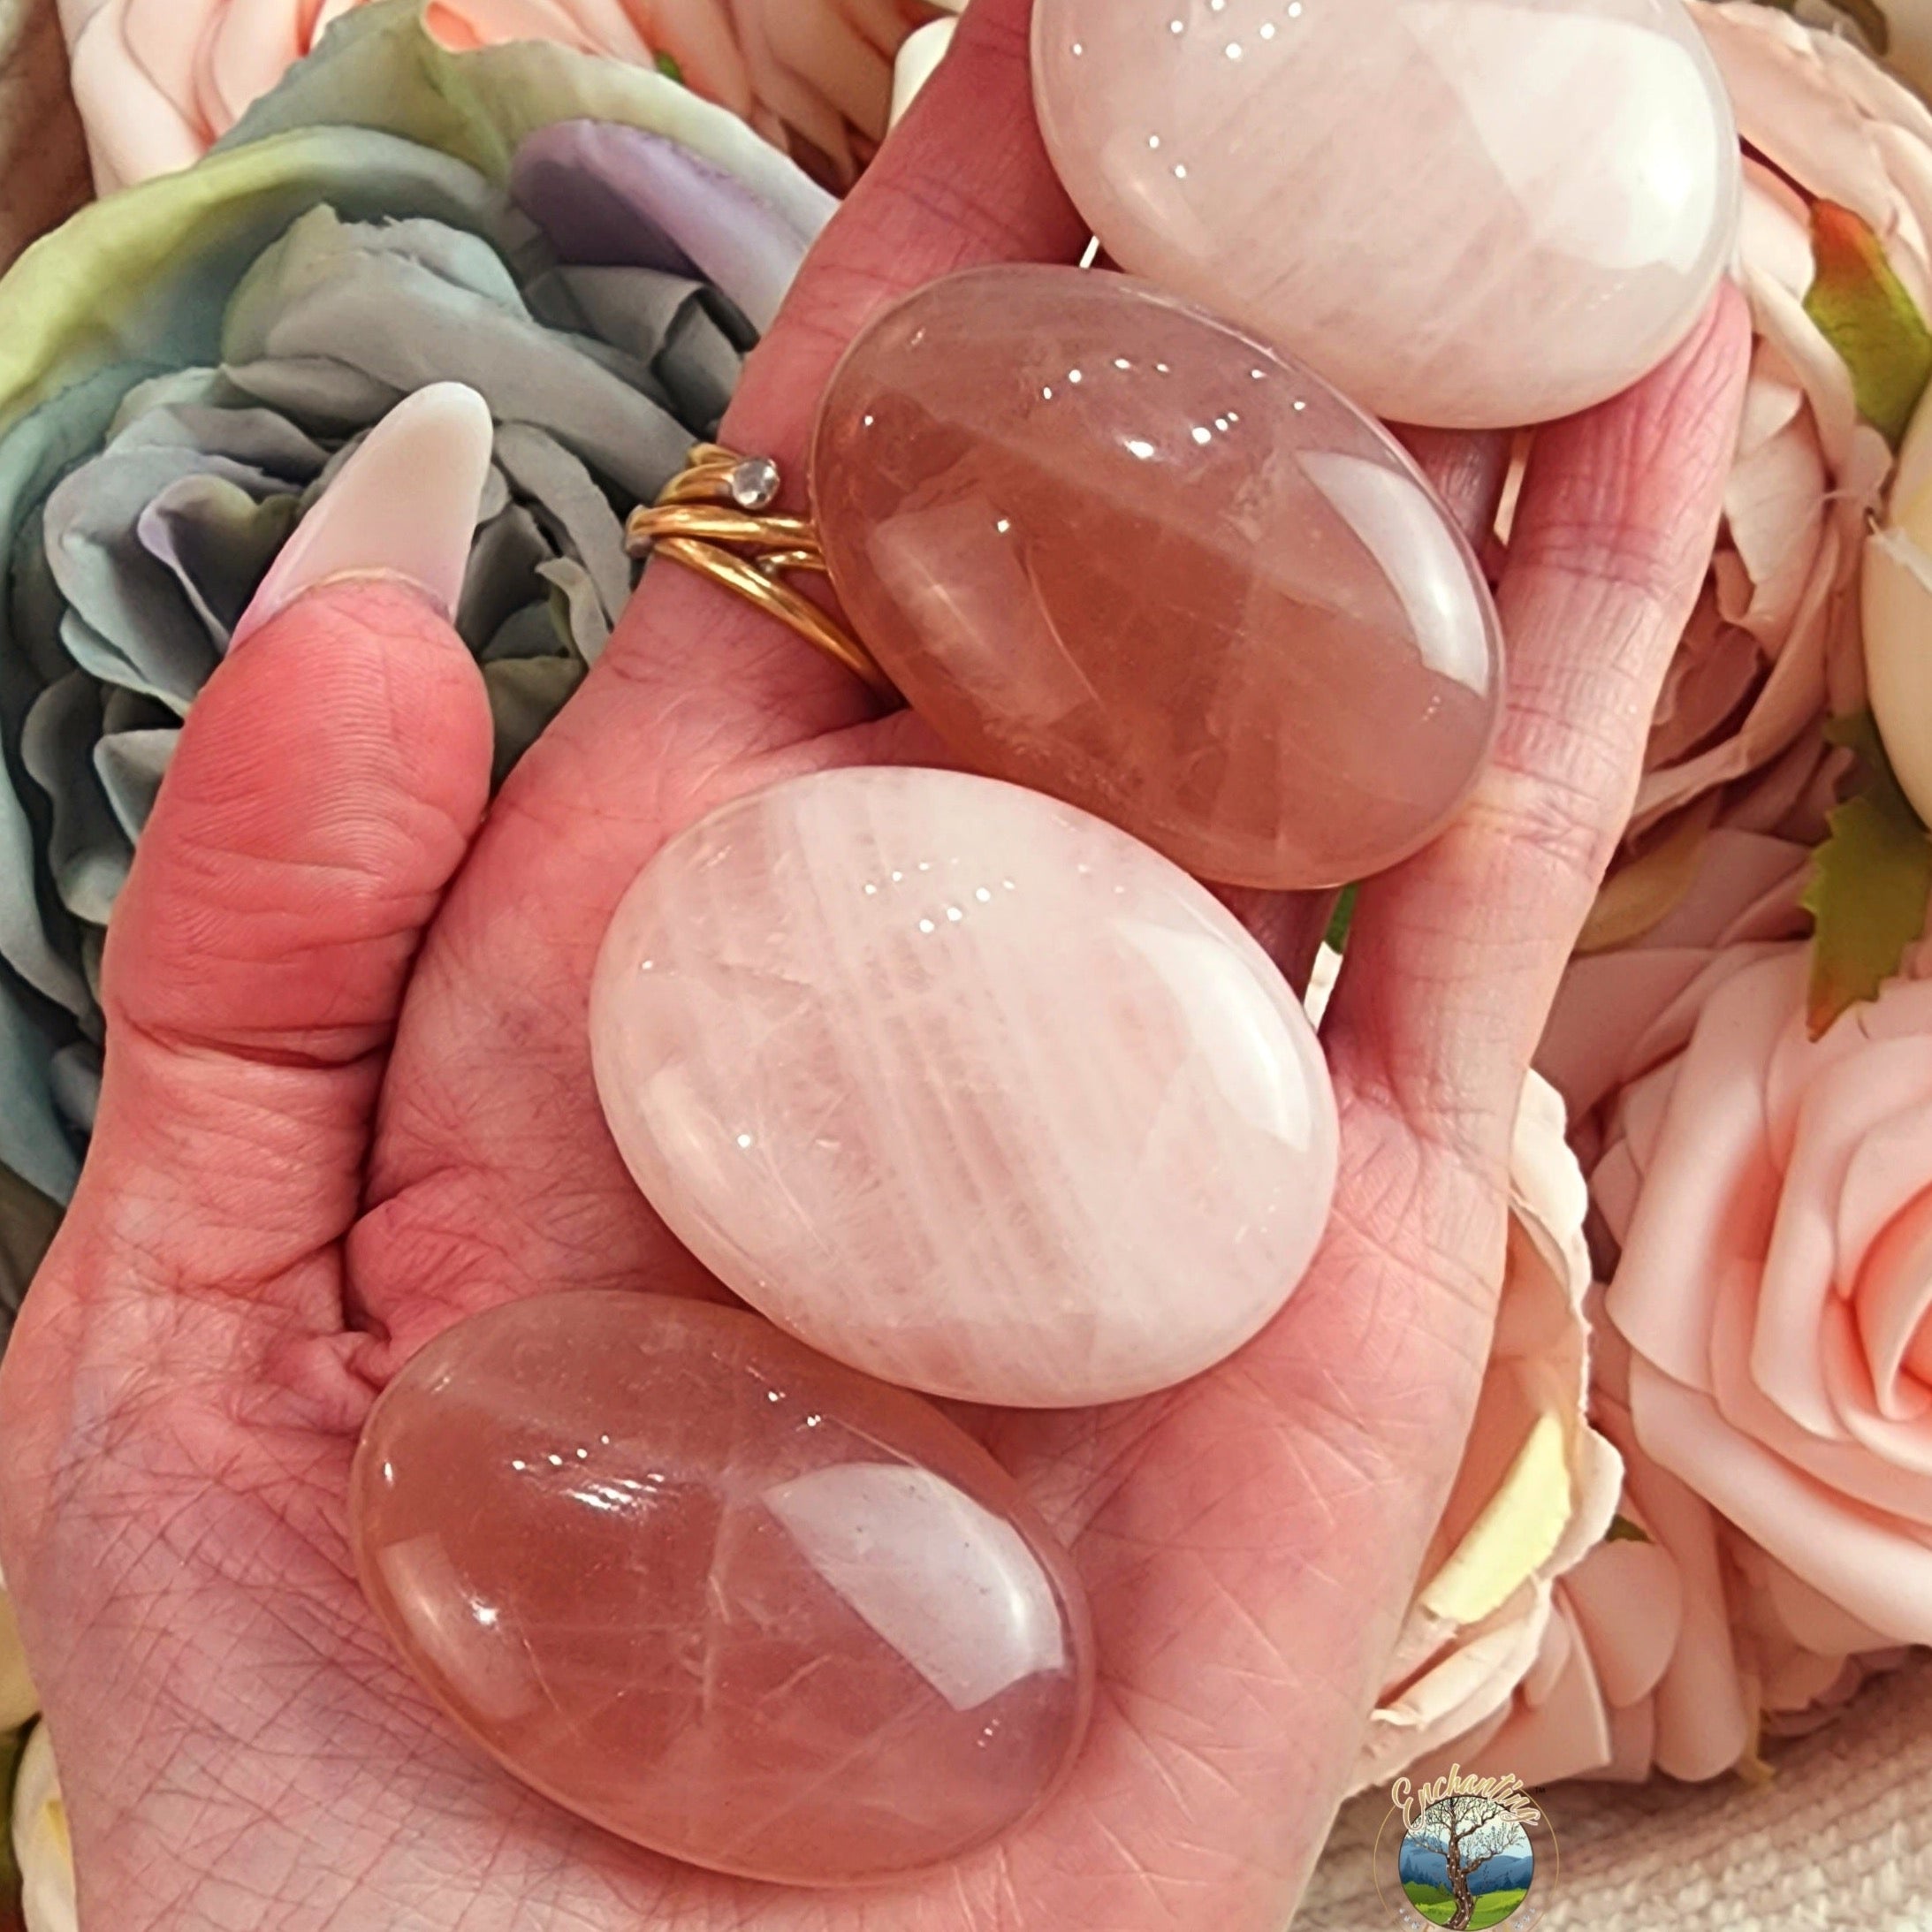 Rose Quartz Palm for Compassion, Healing Trauma and Opening Heart to Love